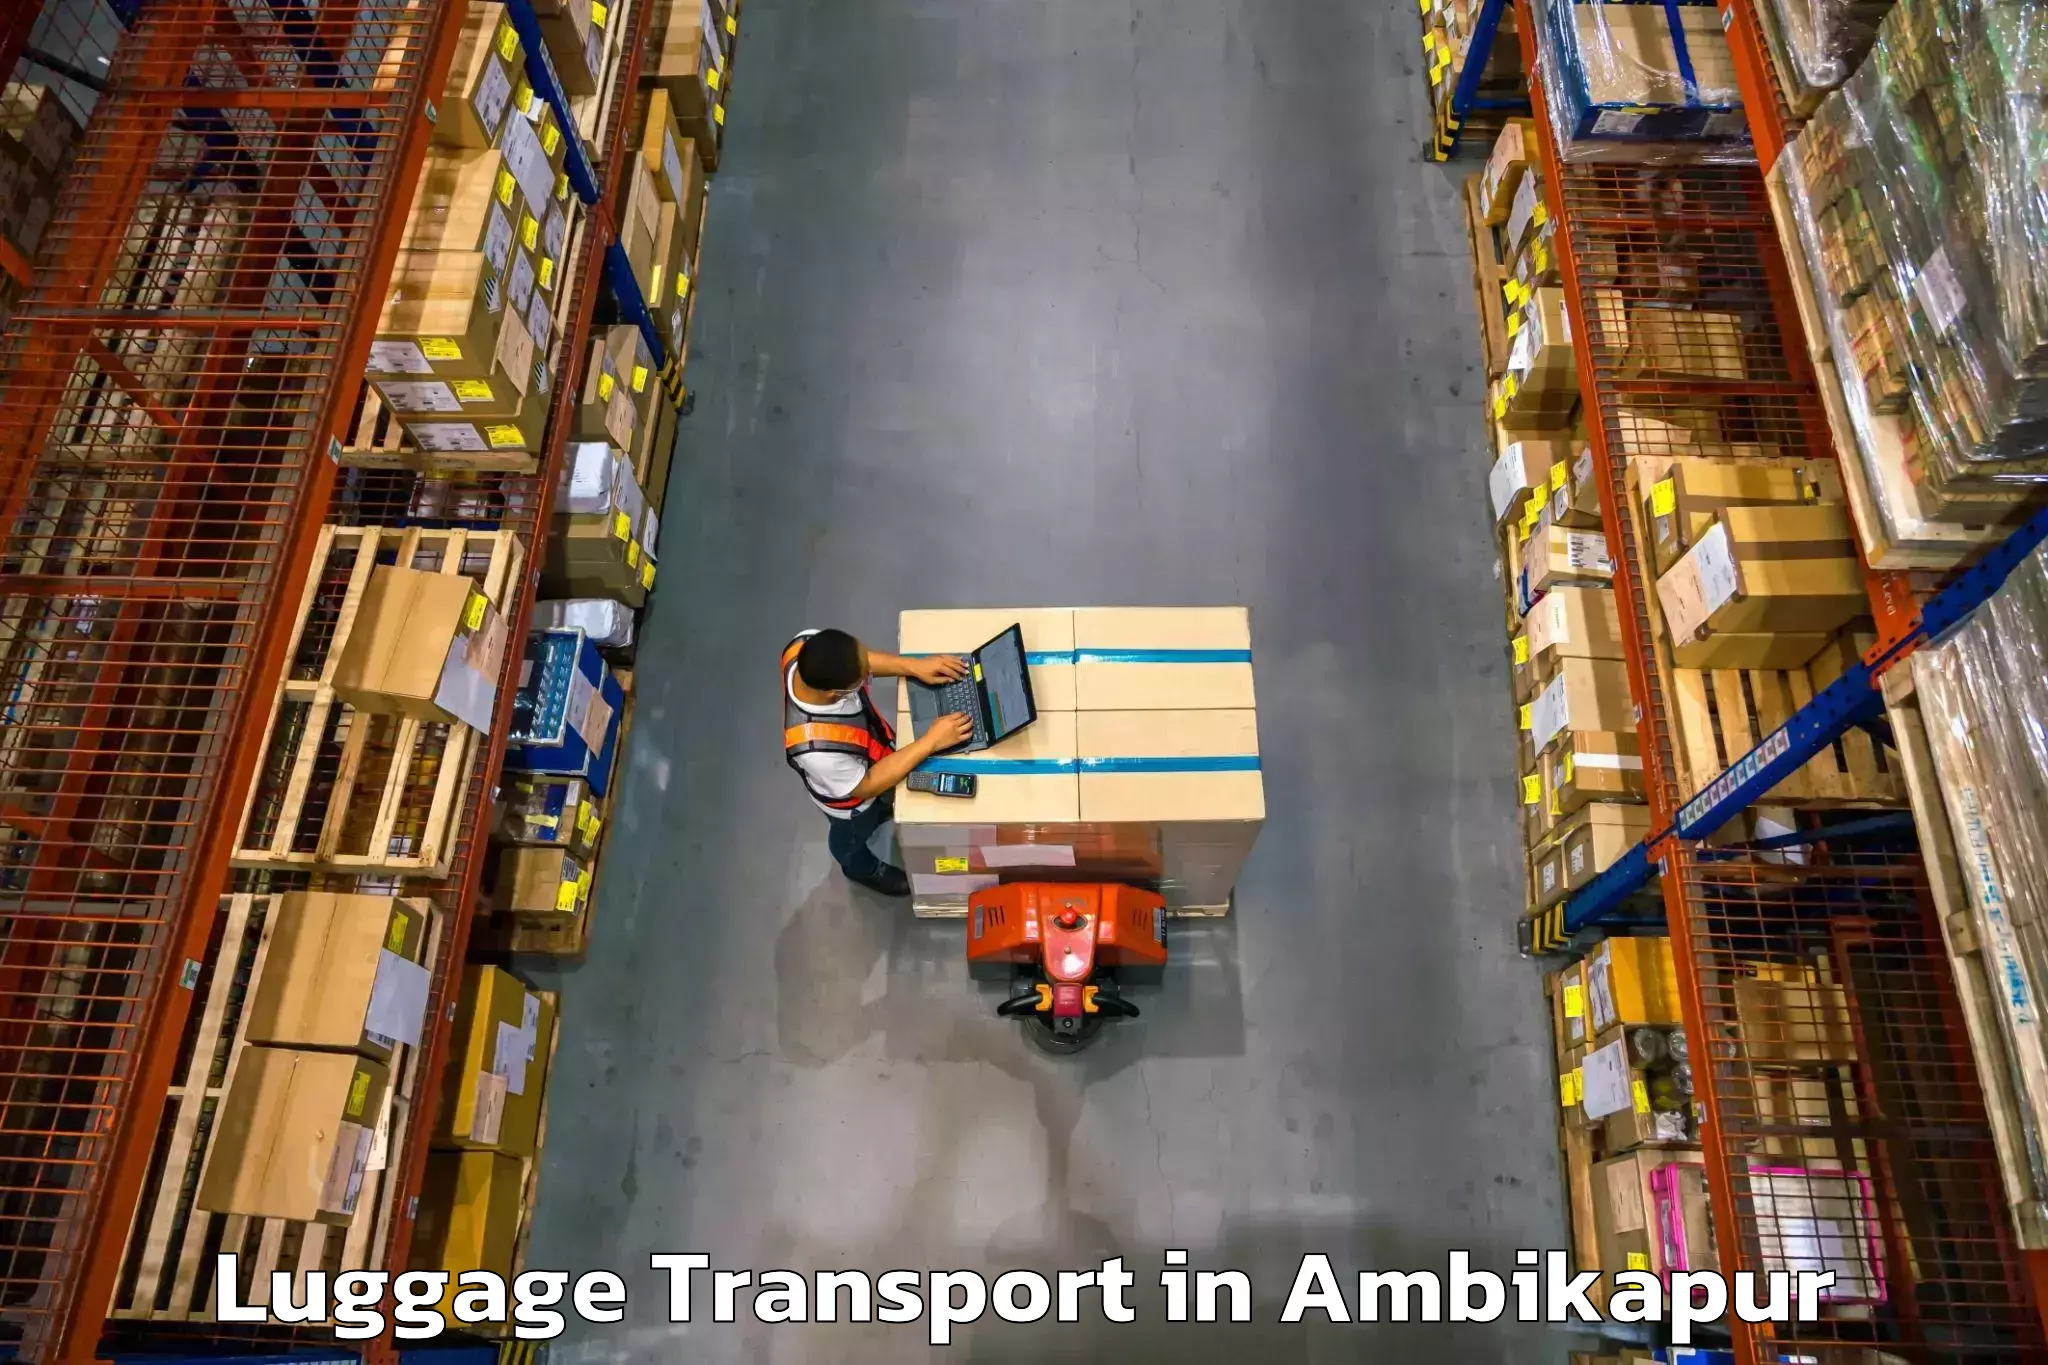 Professional baggage transport in Ambikapur